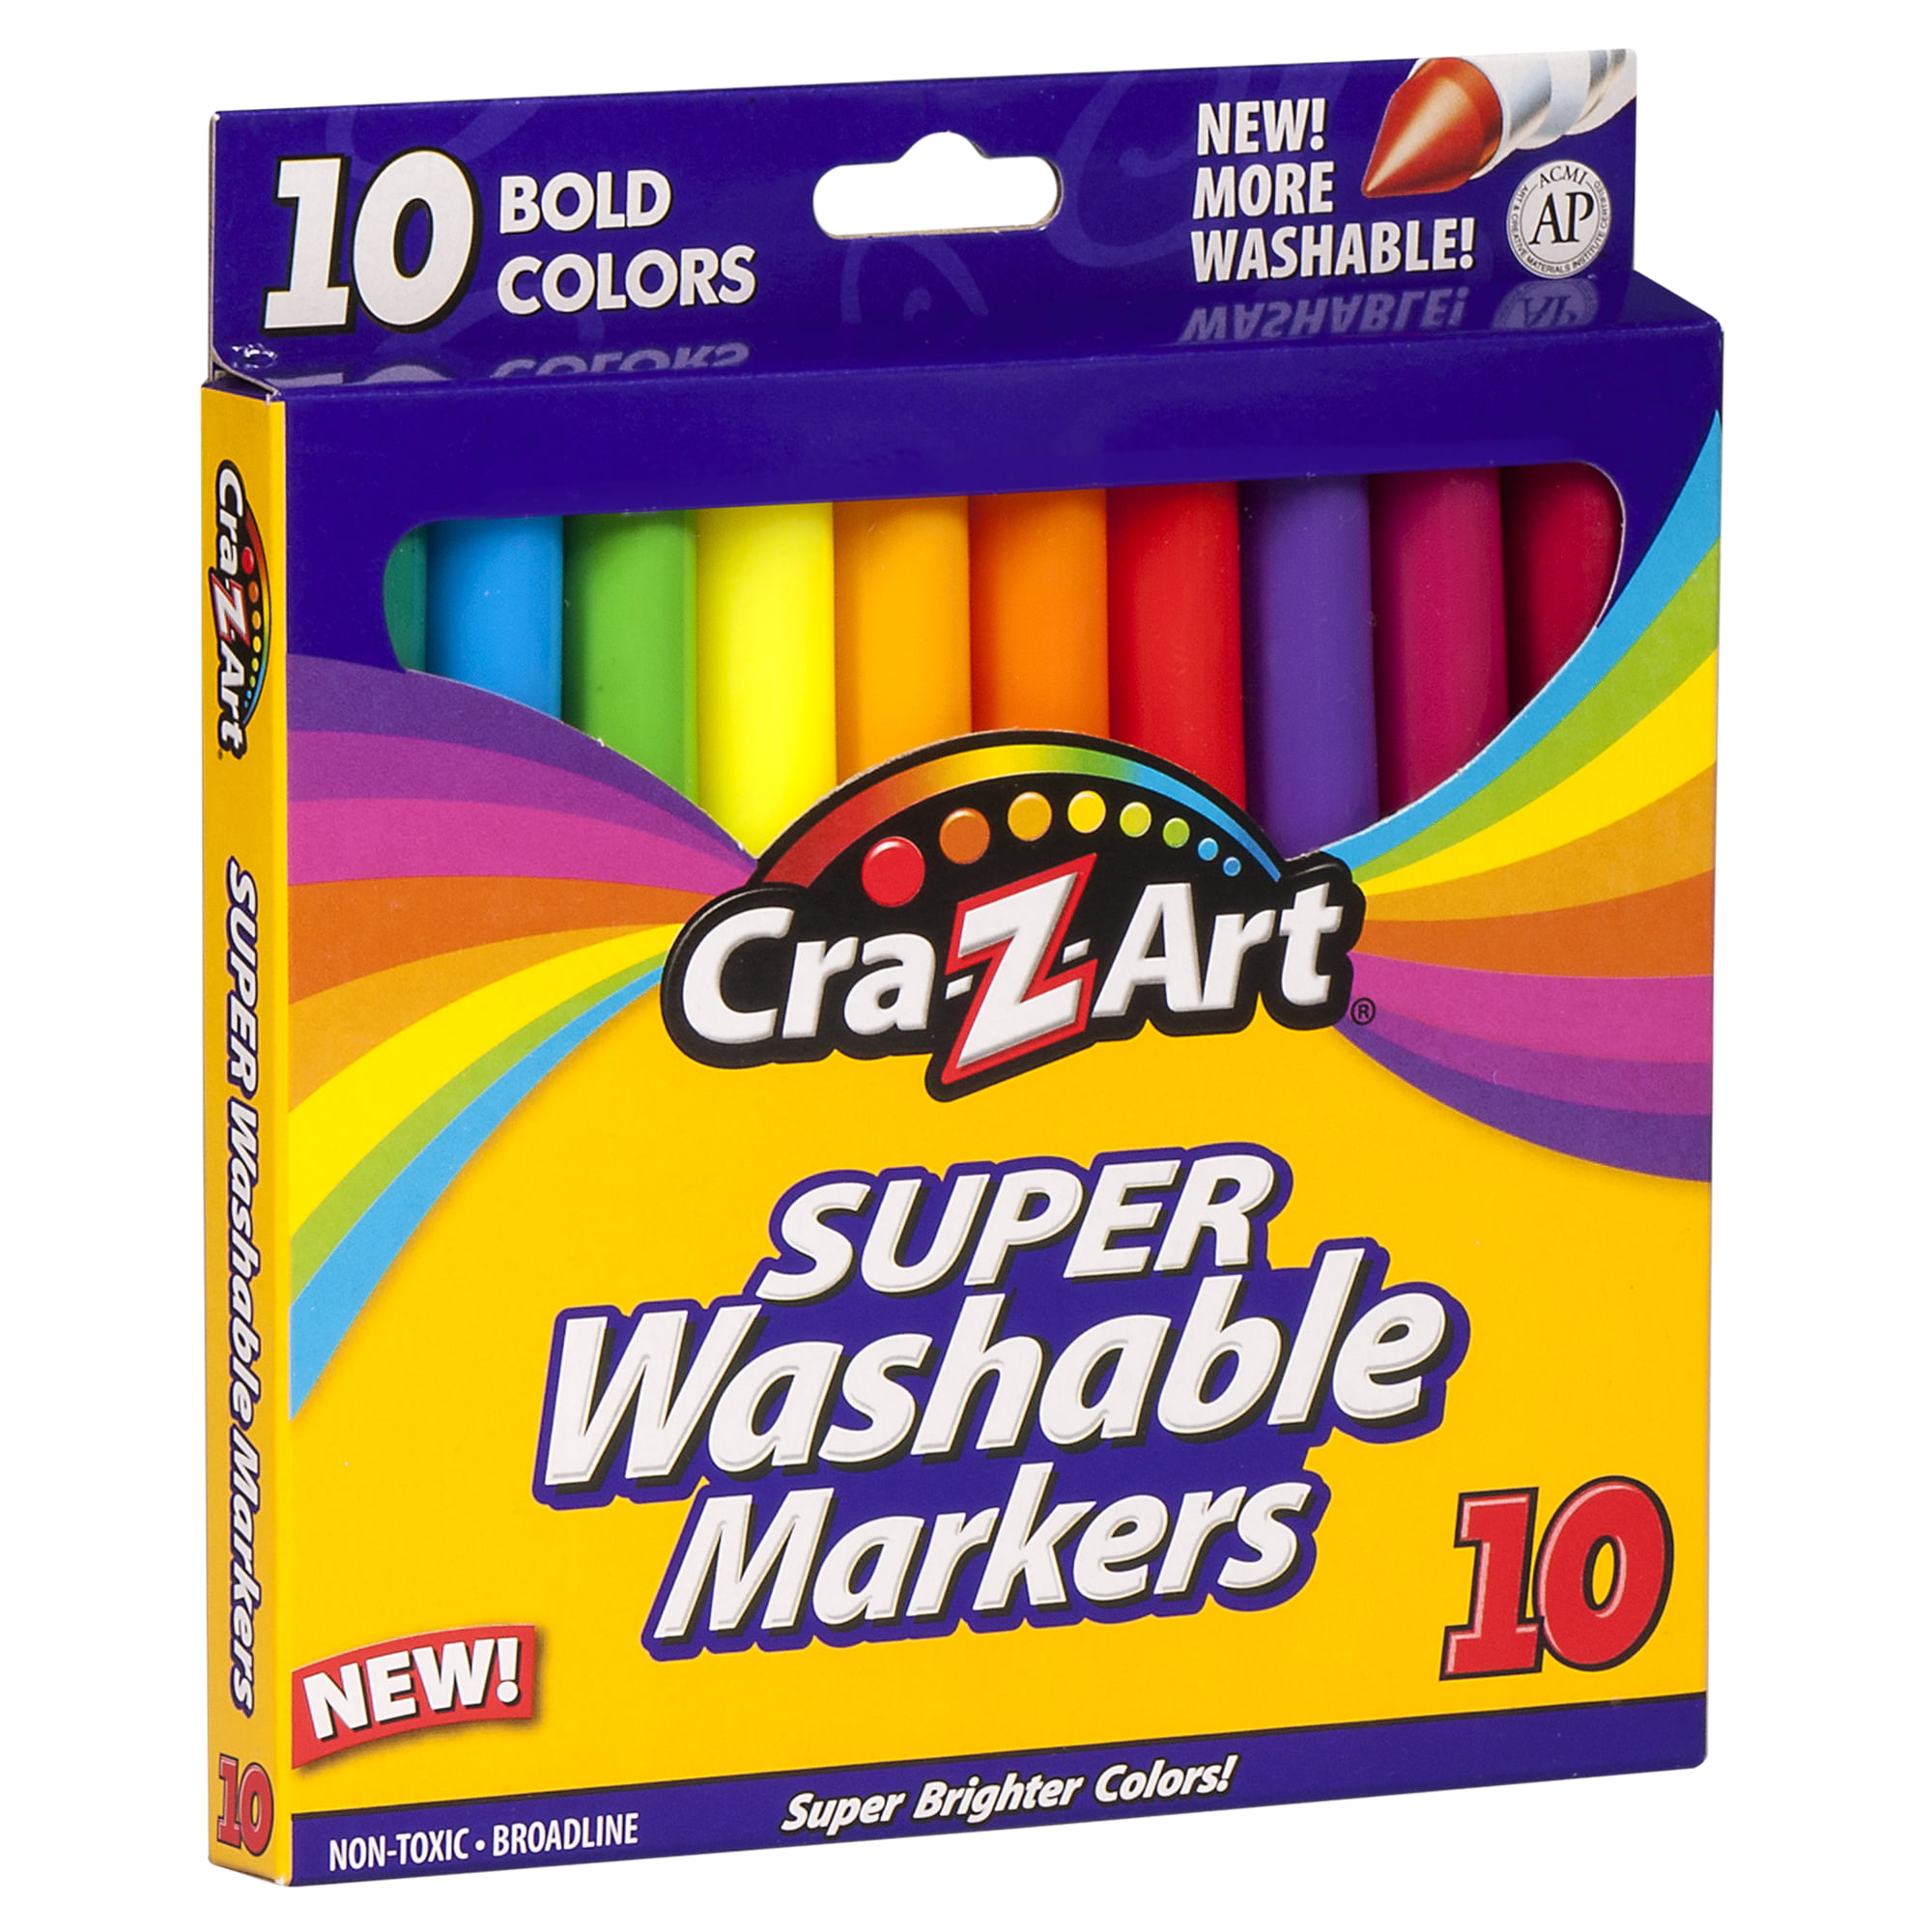 Bek Brands Classic Broad Line Markers 10 ct Nontoxic and Washable 2 Pack Long-Lasting Brilliant Colors 